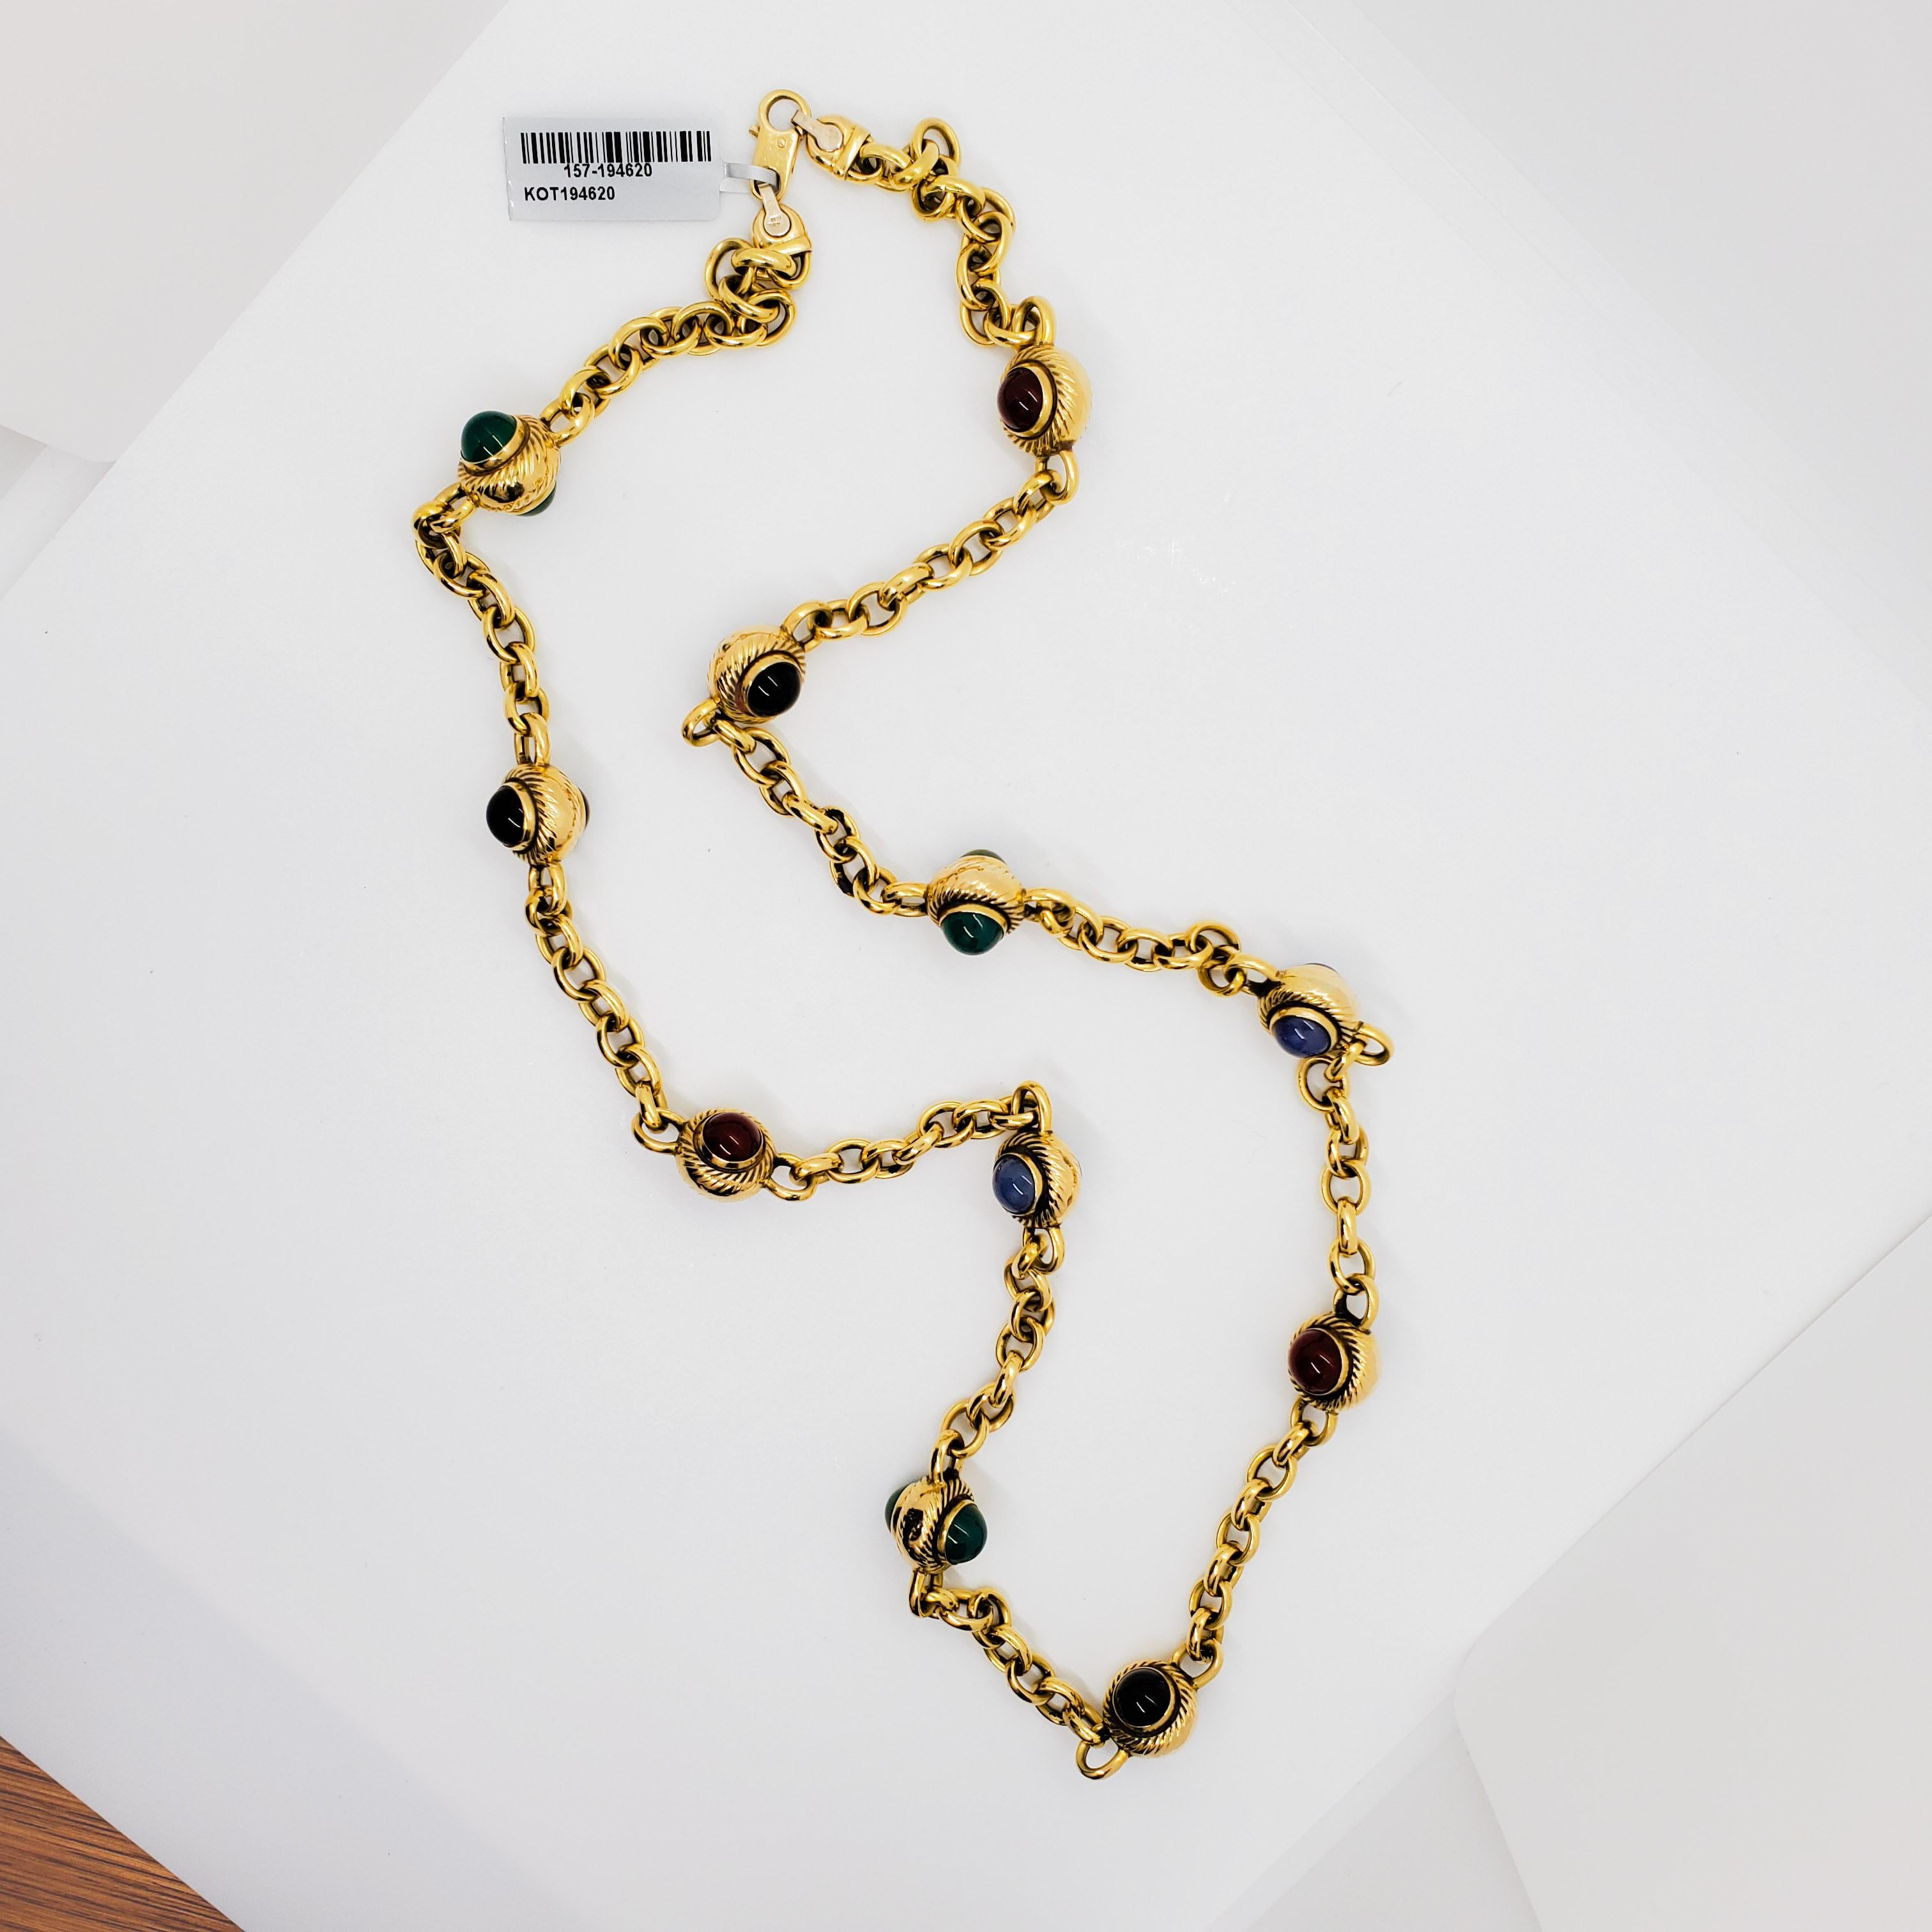 Women's or Men's Estate 18 Karat Yellow Gold Chain Necklace with Multi-Color Stones